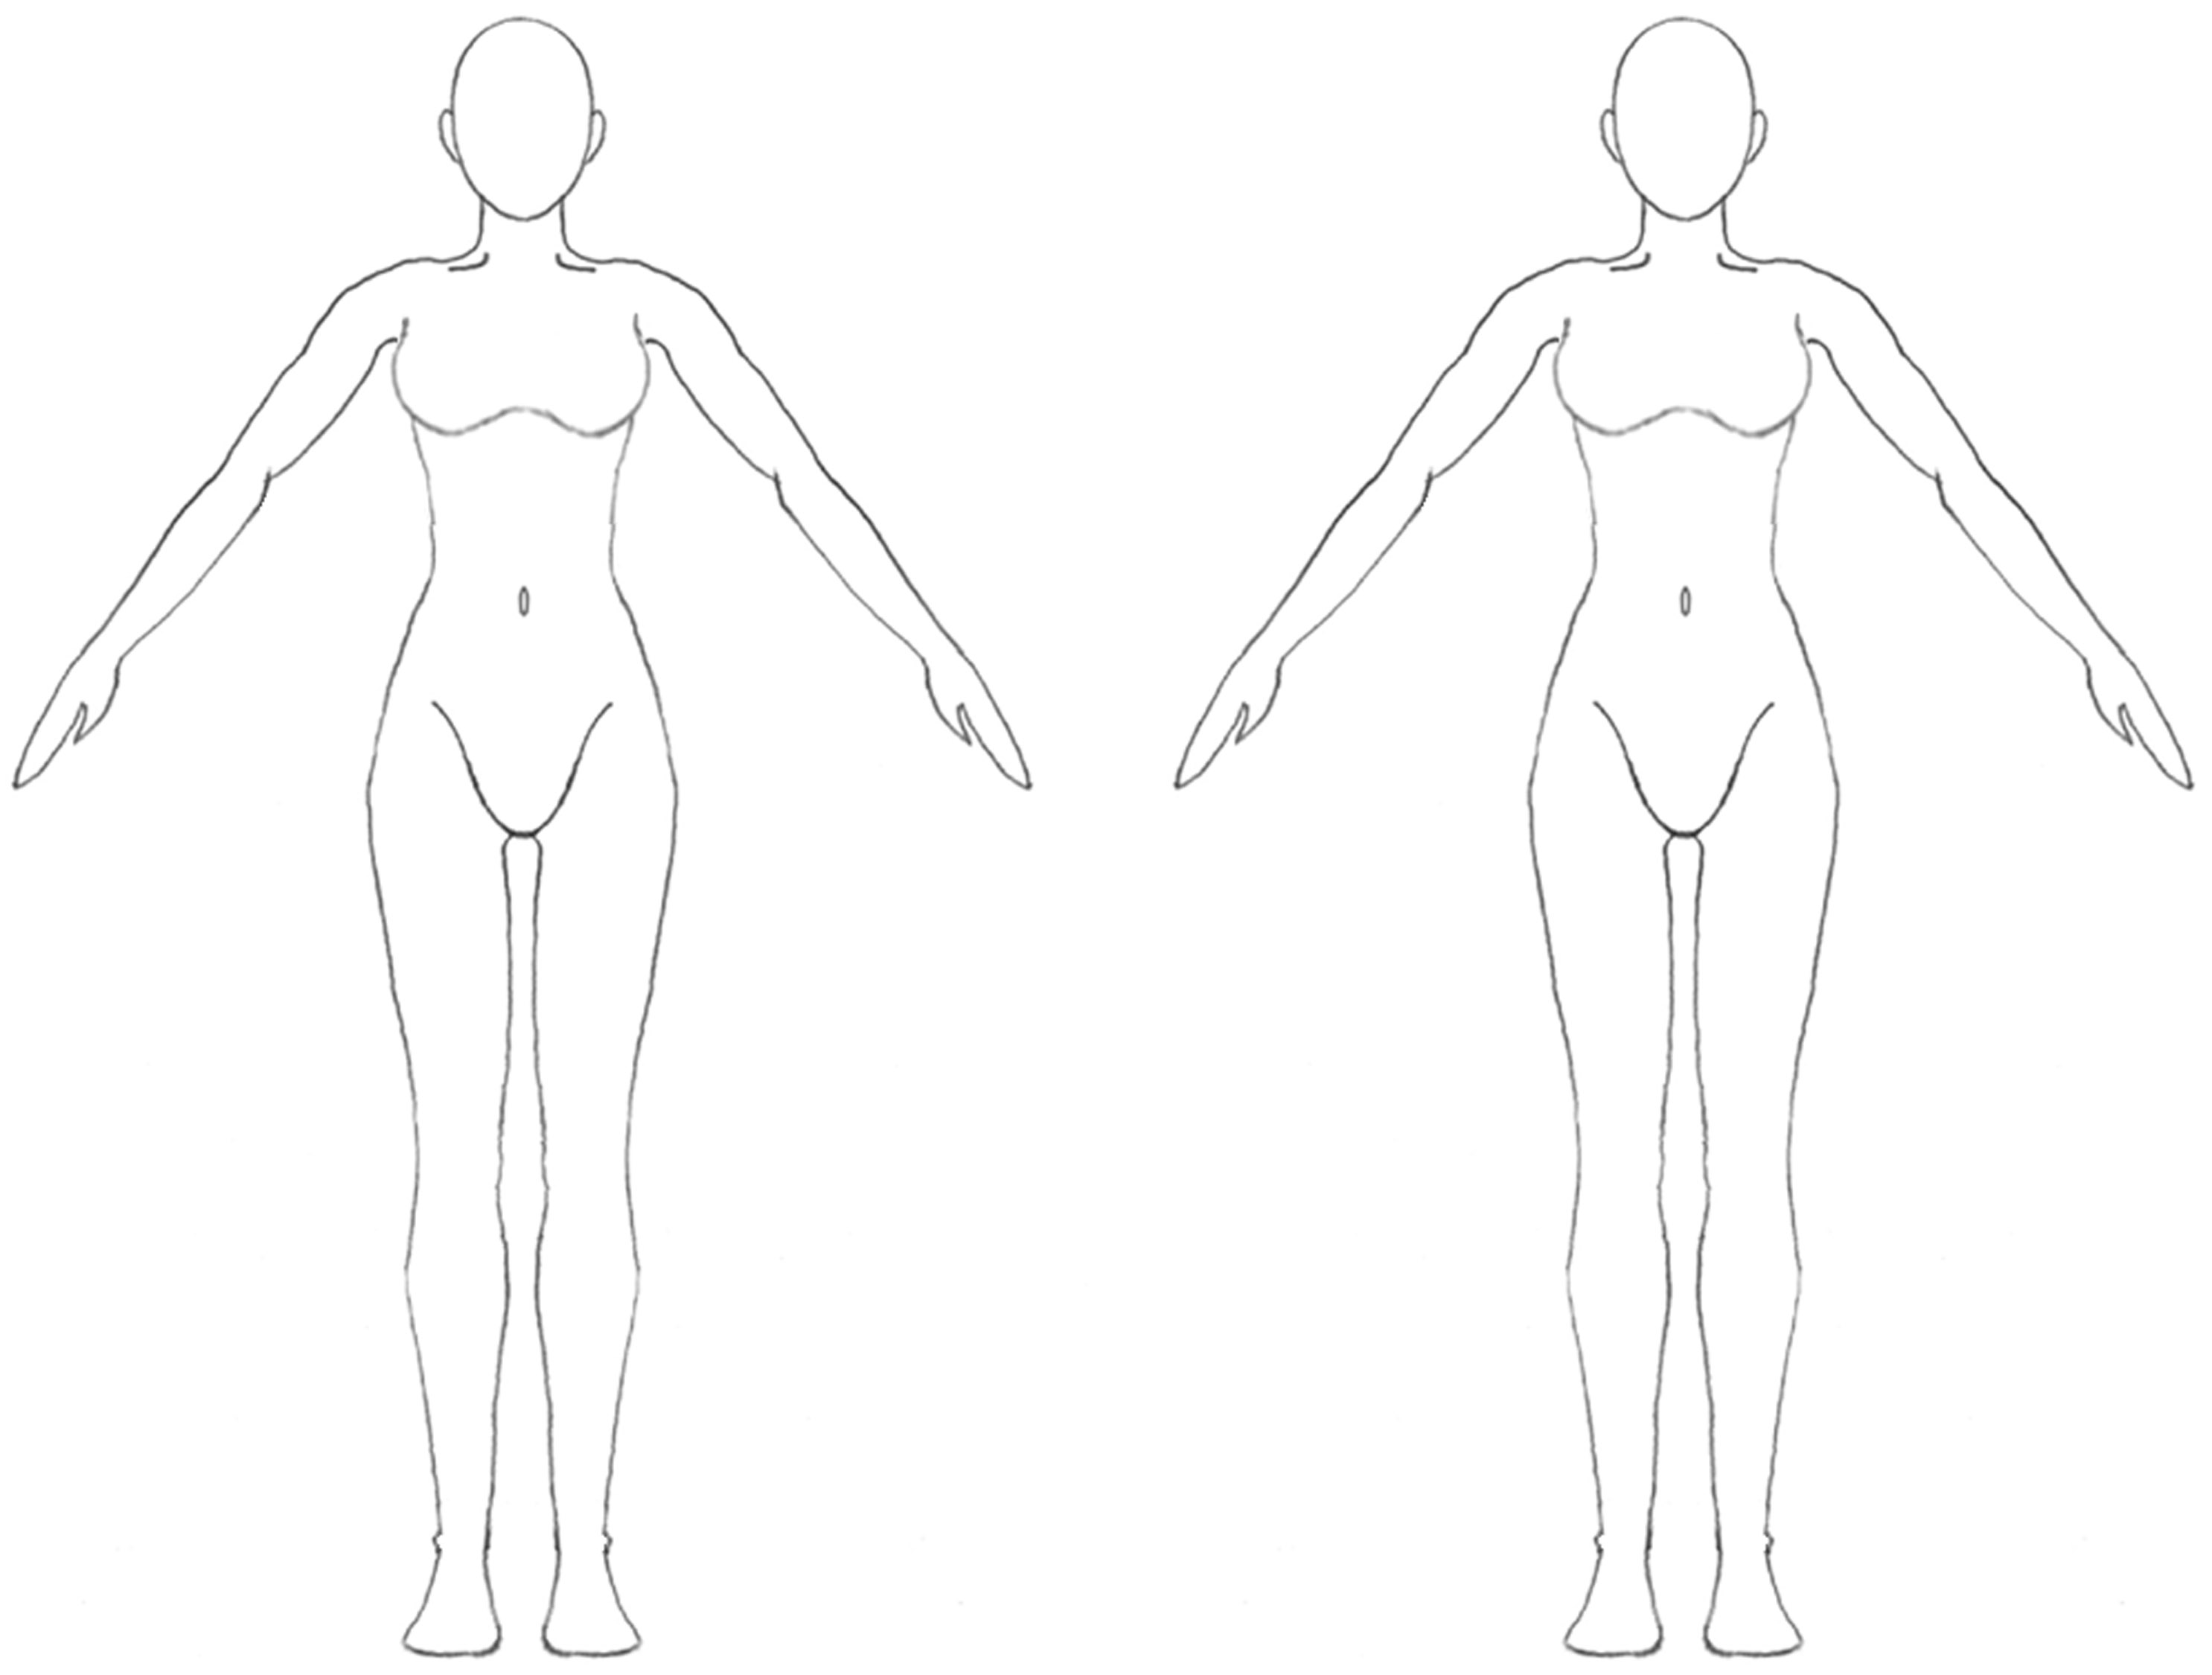 Free Blank Body, Download Free Blank Body png images, Free Throughout Blank Body Map Template